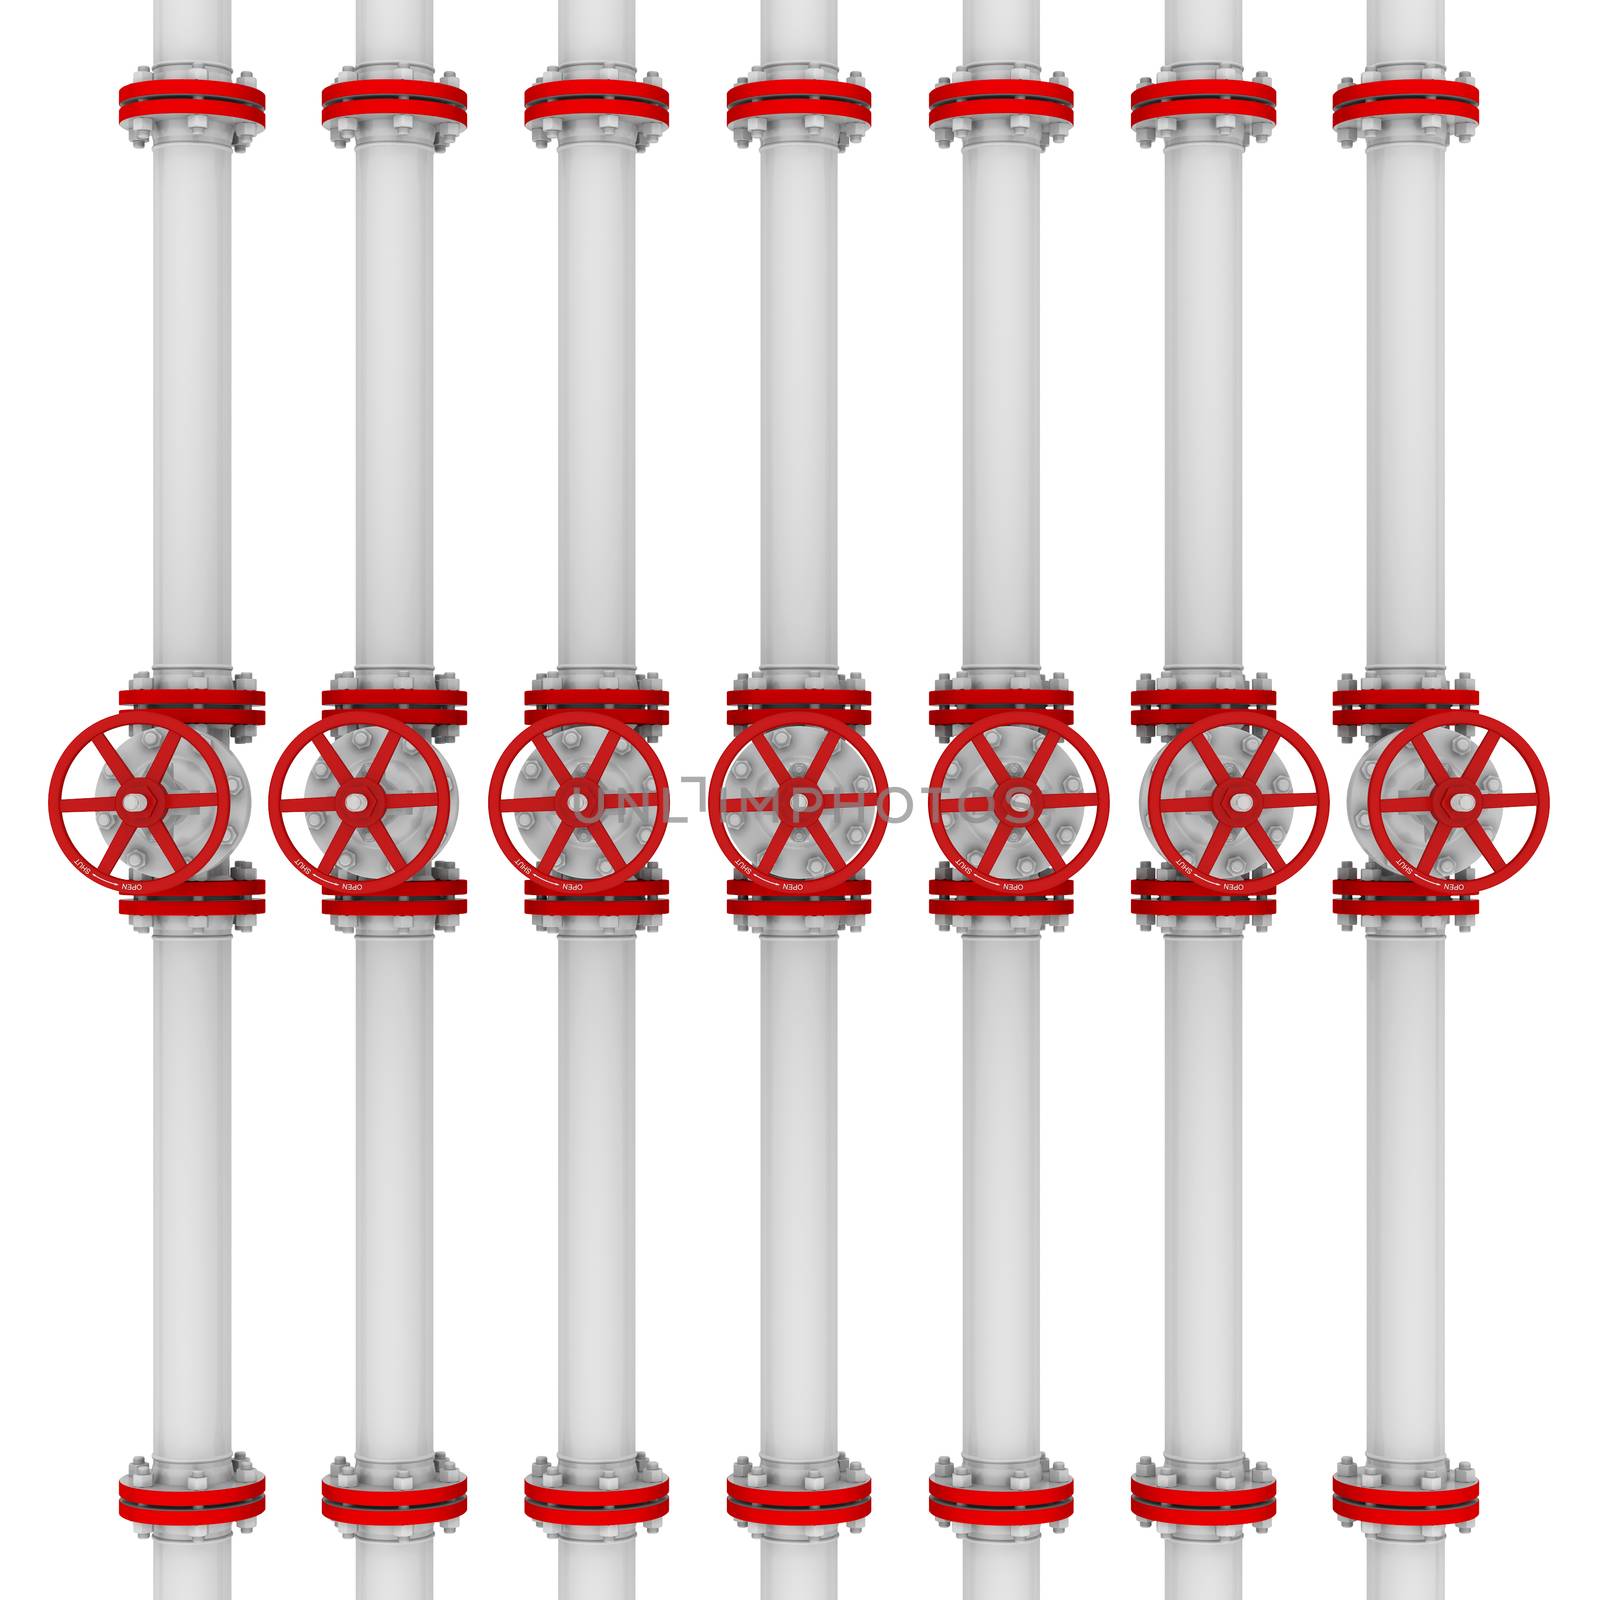 White pipes and valves. Isolated render on a white background